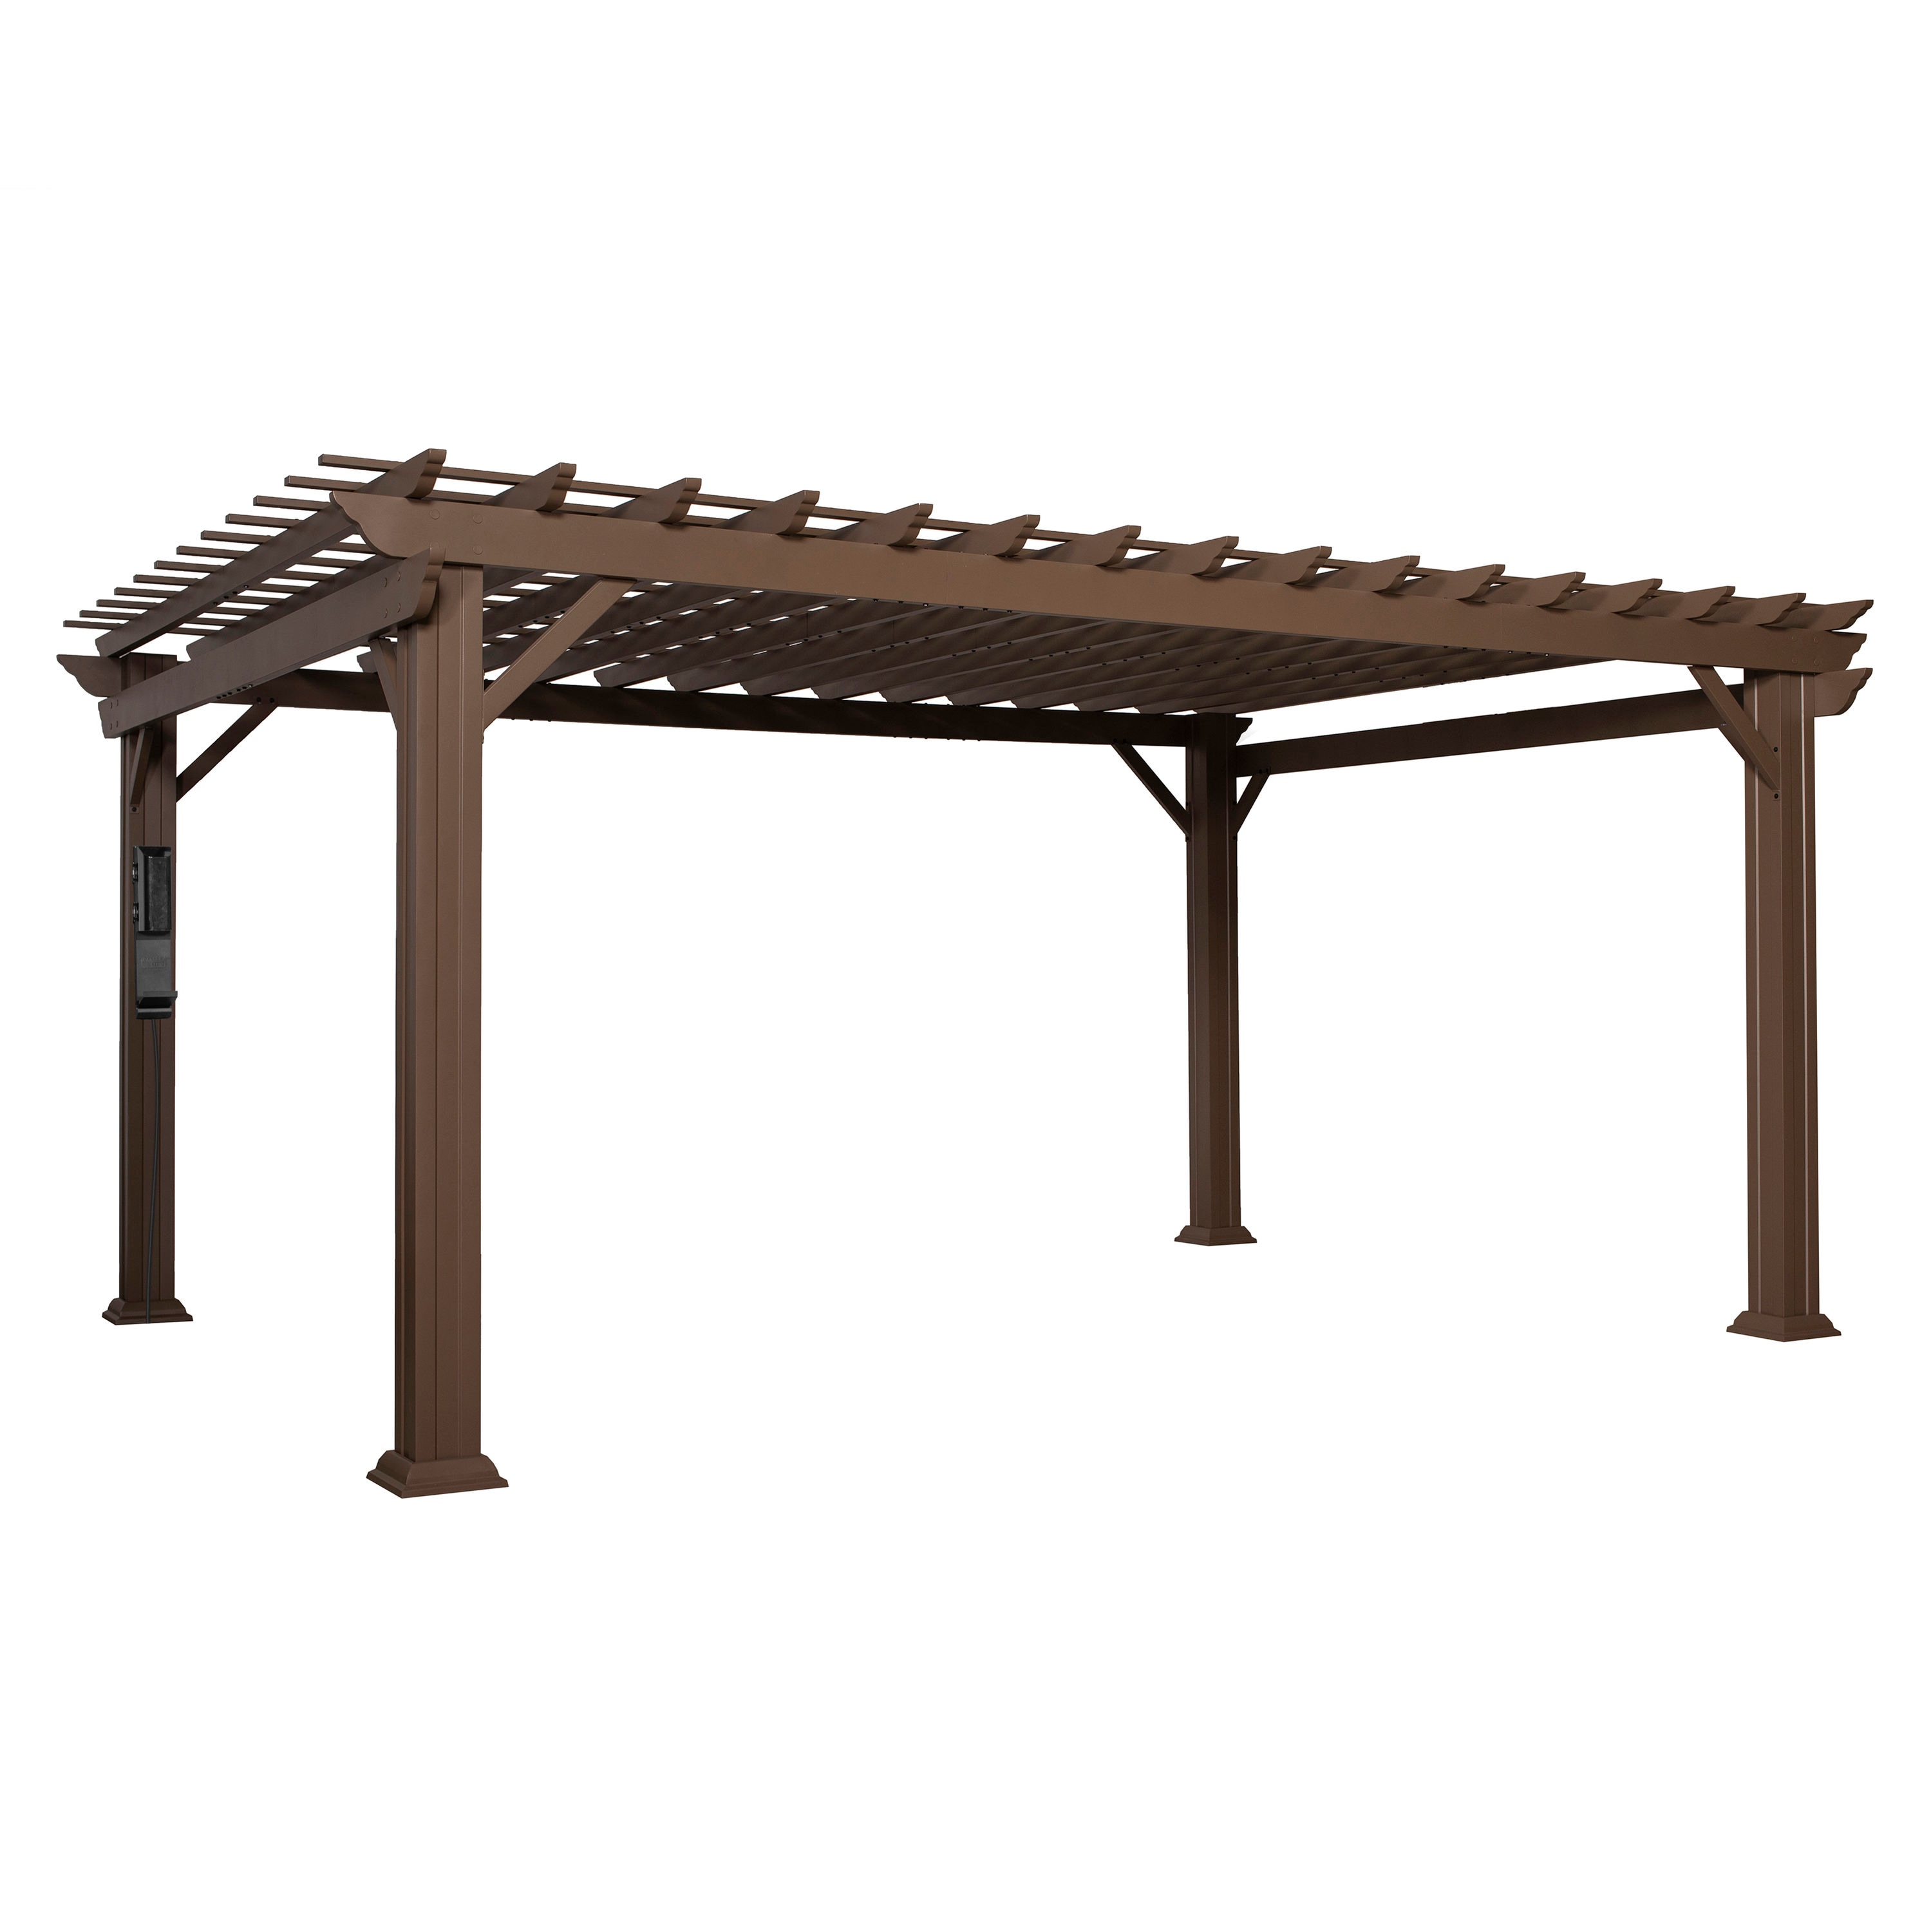 Besmettelijk Leraren dag plank Backyard Discovery 12-ft W x 16-ft L x 7-ft 10-3/4-in Brown Metal  Freestanding Pergola with Canopy at Lowes.com